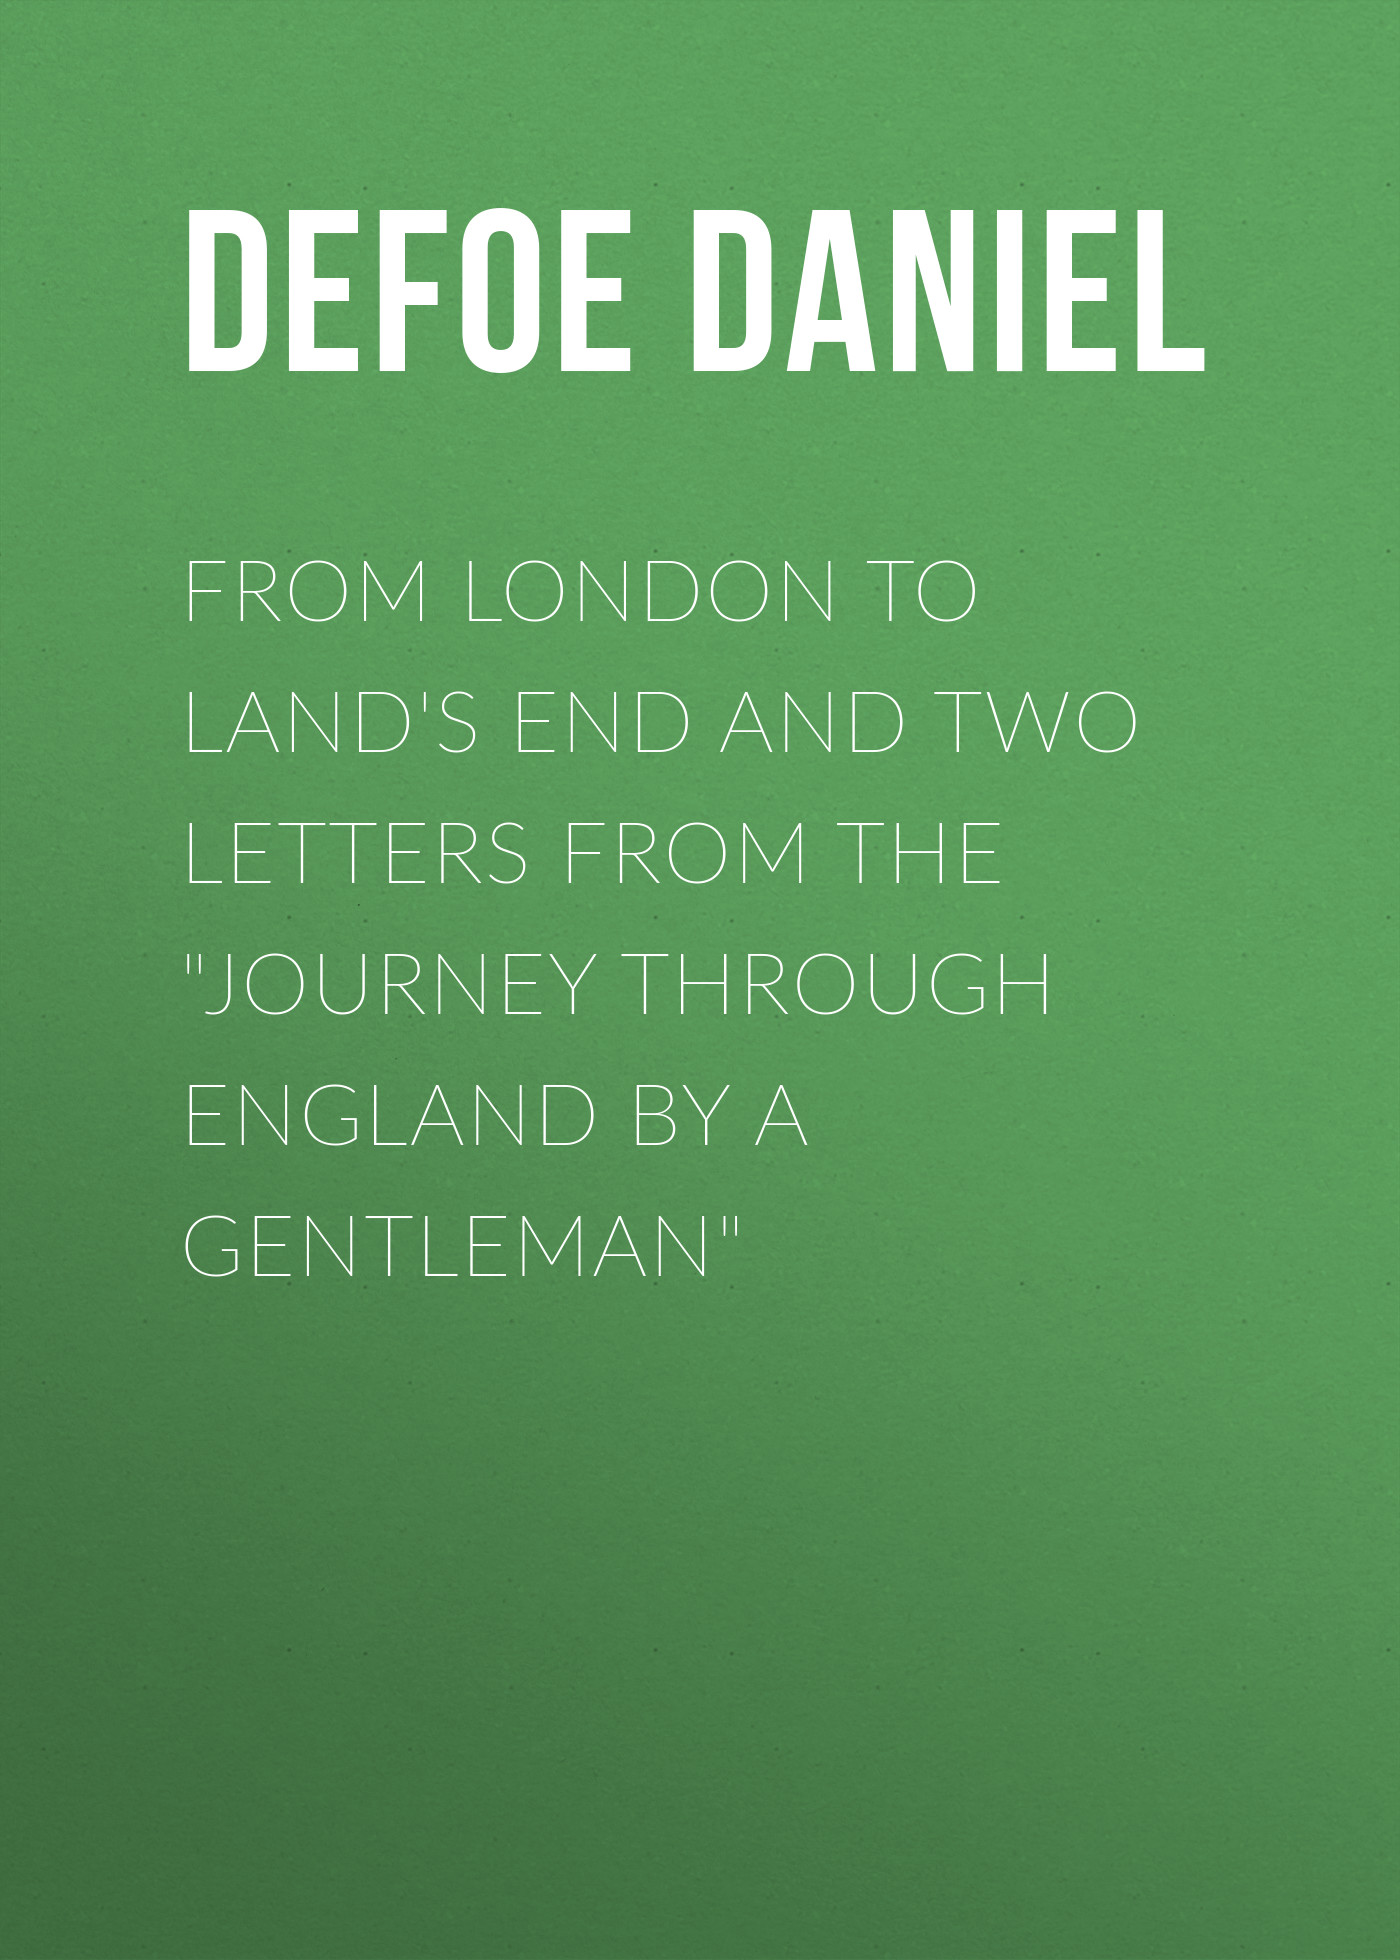 From London to Land's End and Two Letters from the"Journey through England by a Gentleman"